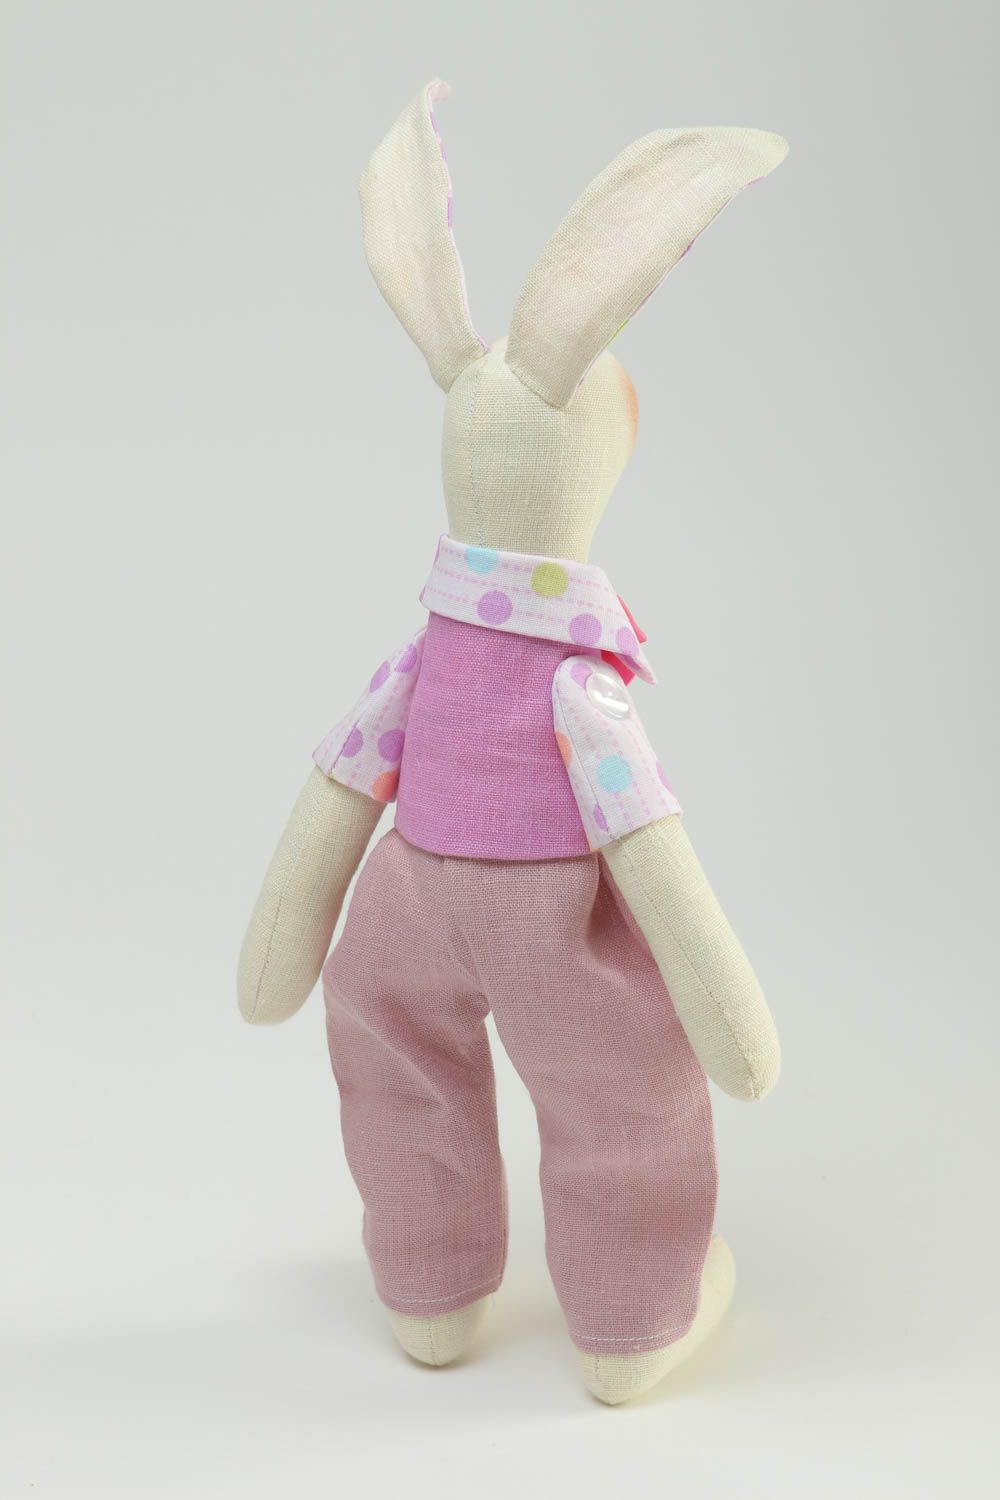 Handmade soft toy cute toy soft bunny toy home decor toys for girls kids toys  photo 4